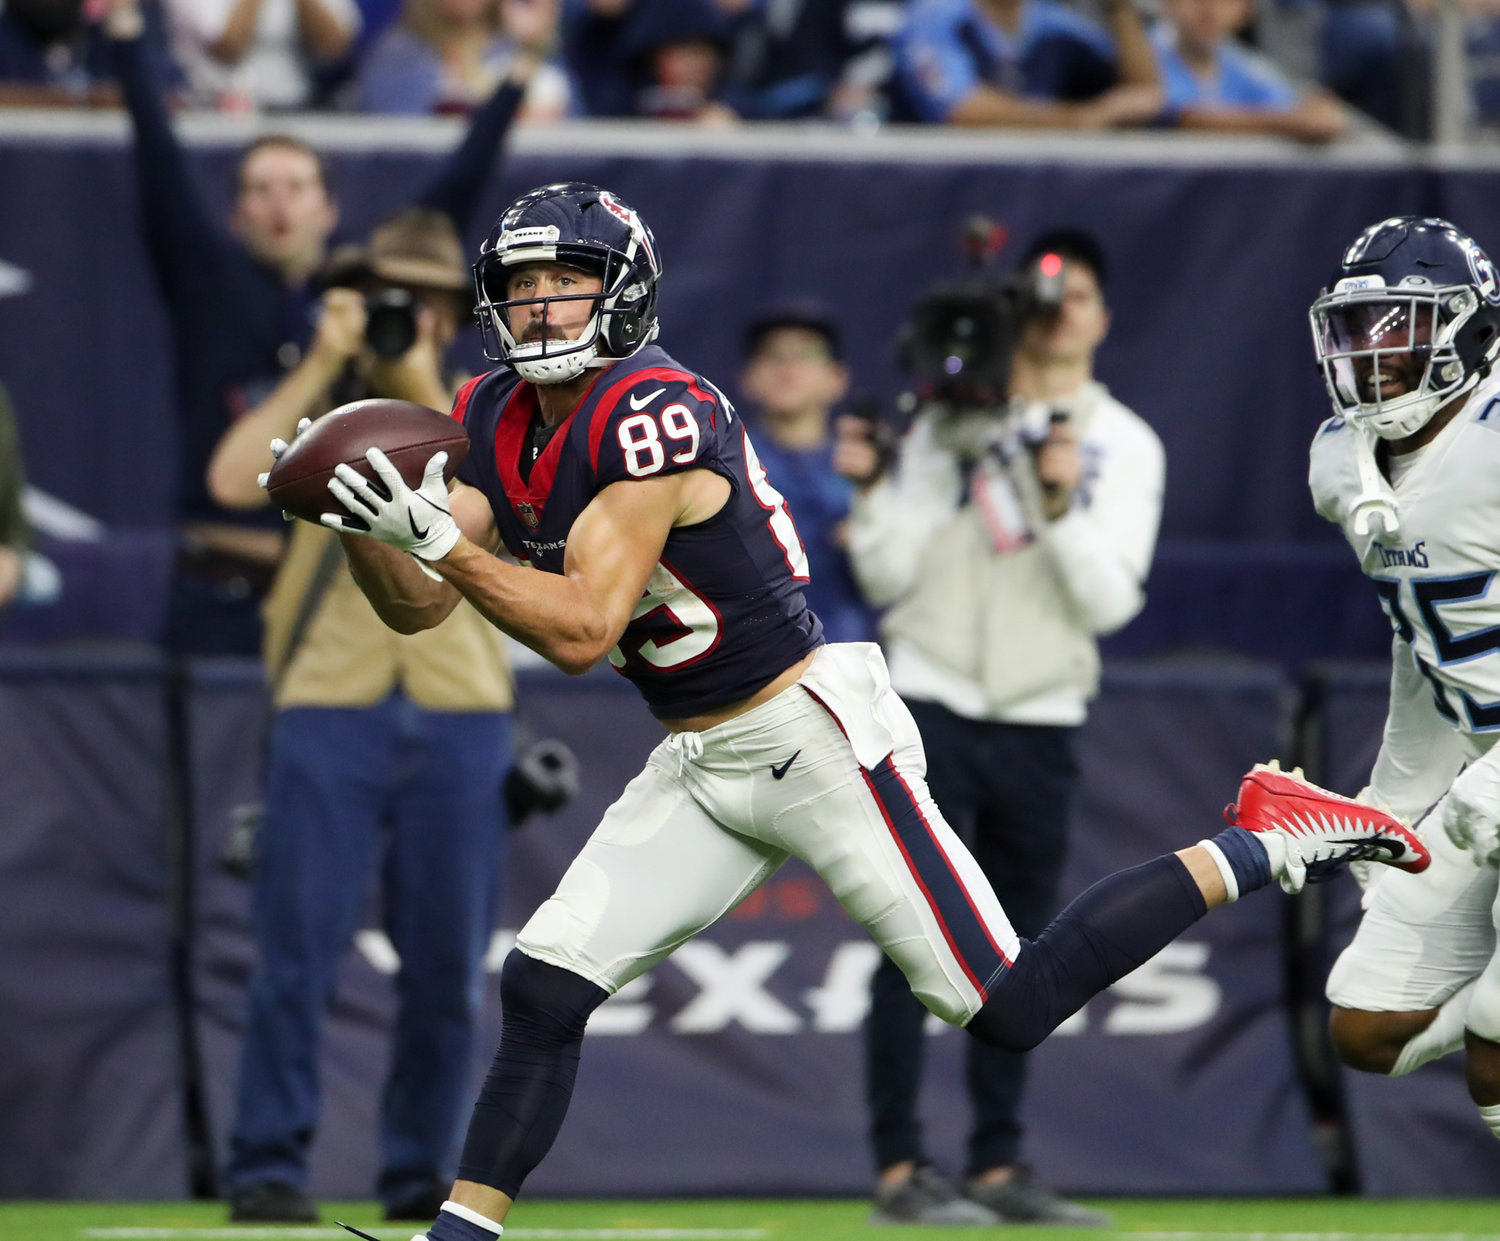 Houston Texans wide receiver Danny Amendola (89) brings in a 26-yard touchdown pass in the fourth quarter of an NFL game between the Texans and the Titans on Jan. 9, 2022 in Houston, Texas.